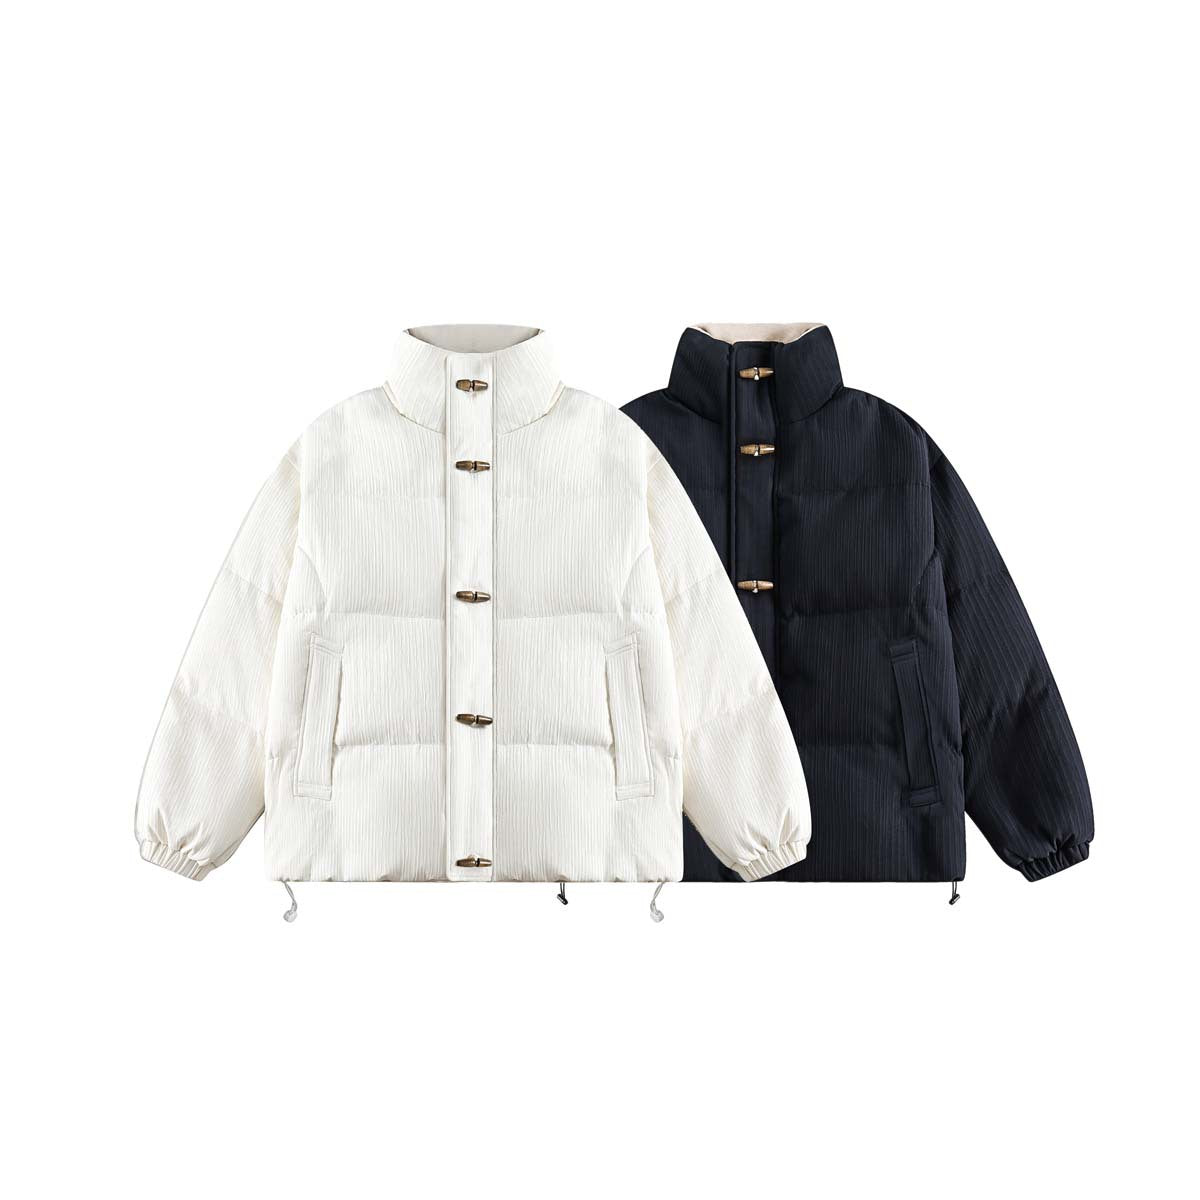 Basic Horn Button Of Trend Down Jacket - MTC LIVE STORE